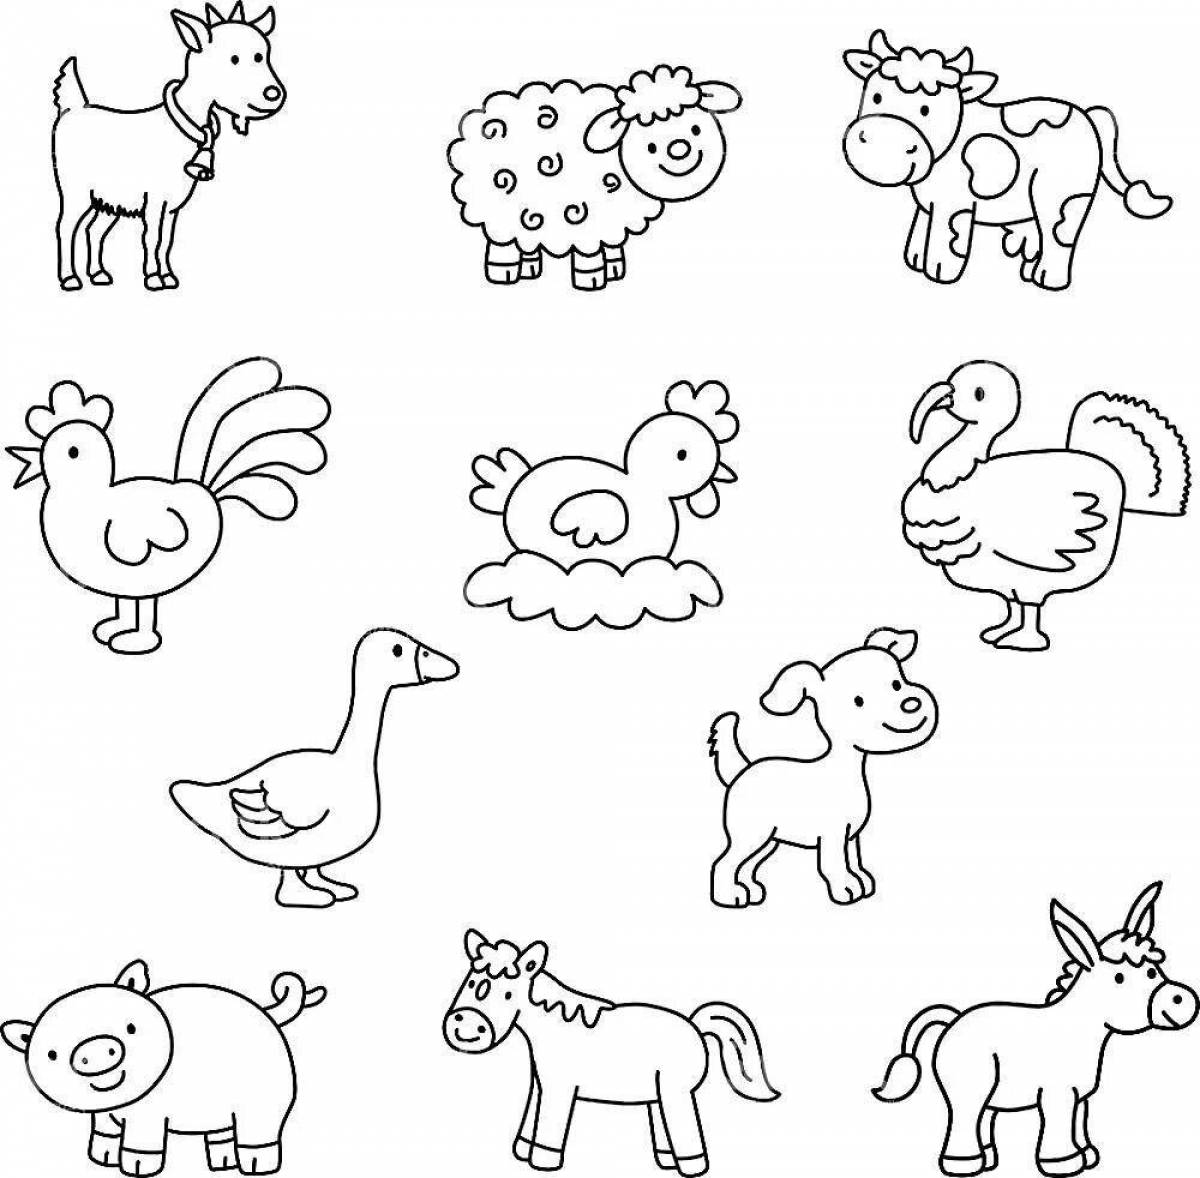 Animated animal coloring games